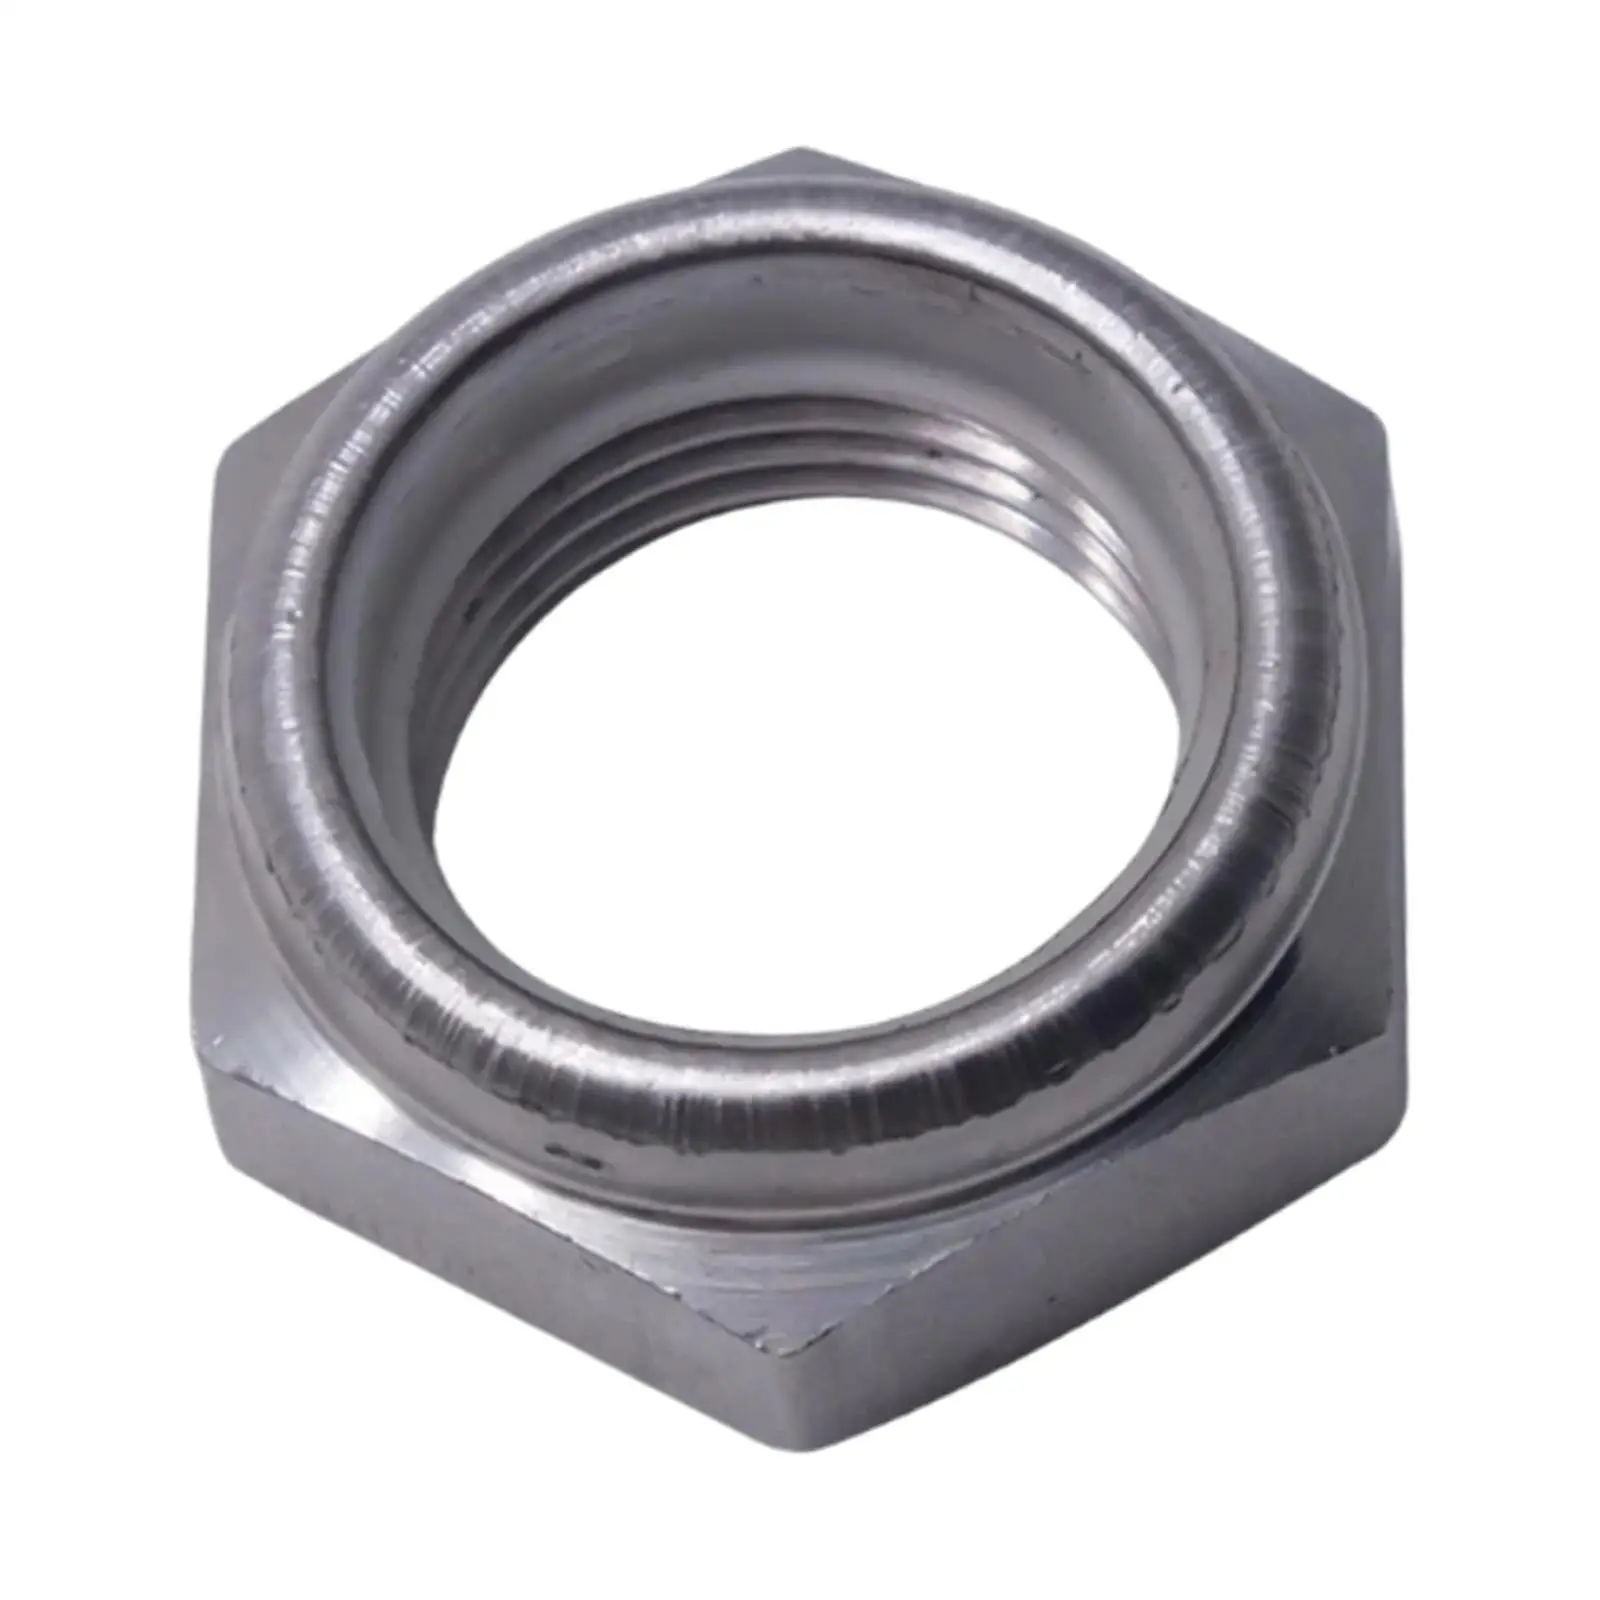 Self Locking Nut Replace 90185-22043 90185-22043-00 Hex Locknut Stainless for